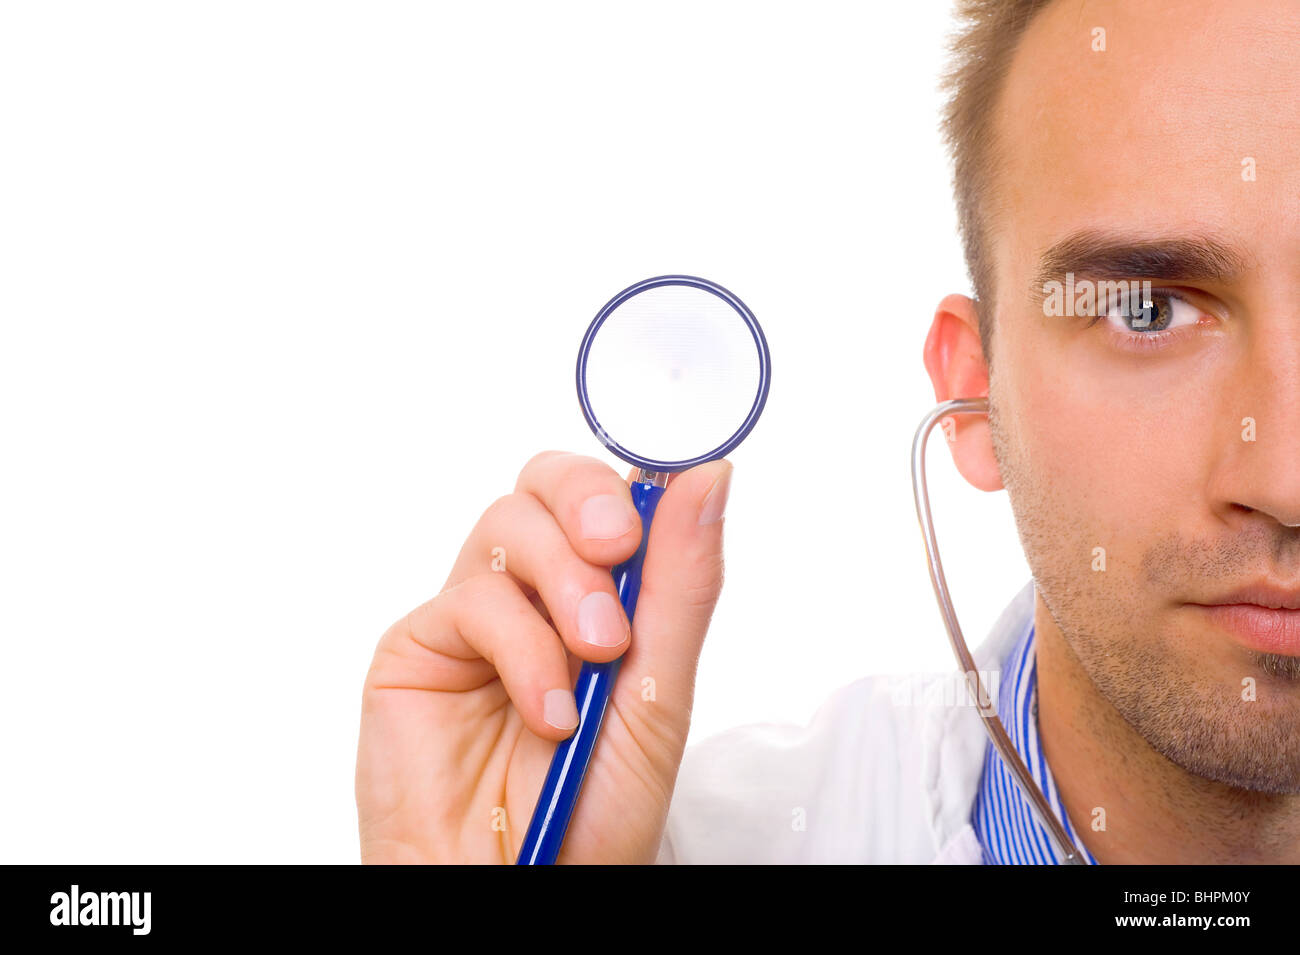 Caucasian doctor holding stethoscope in hand, close up Stock Photo